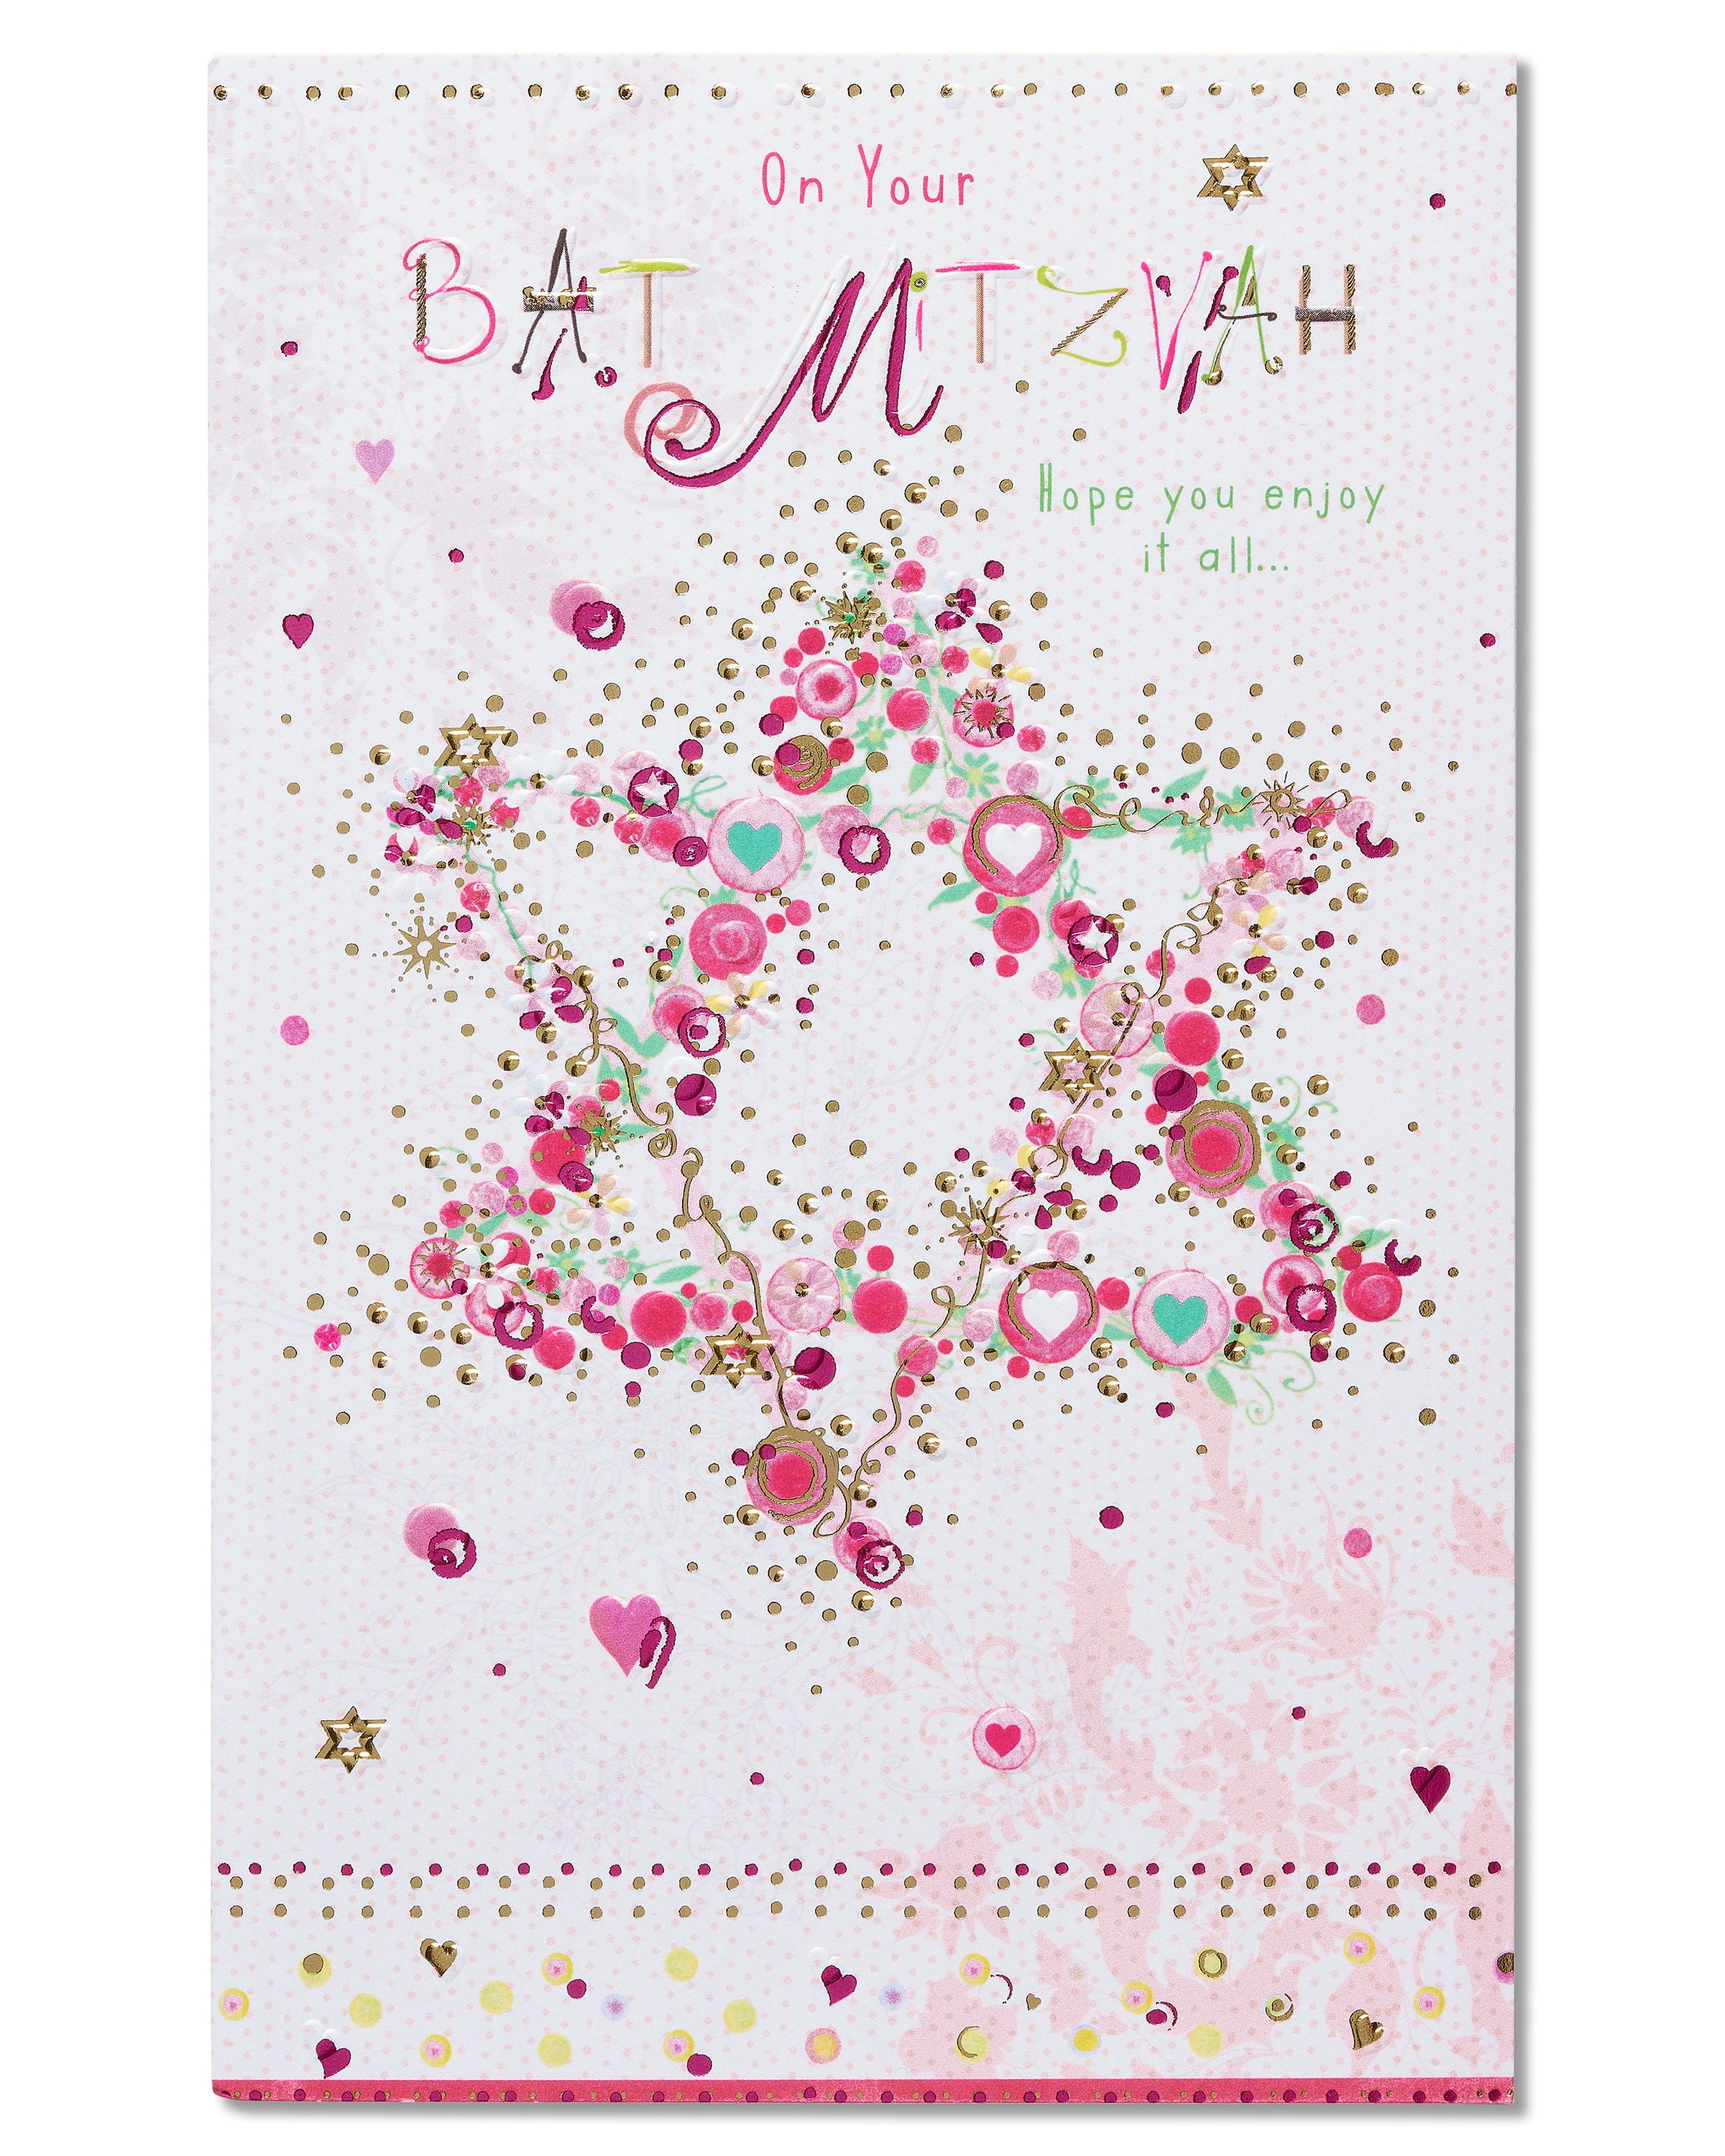 Die Cut Mazel-Tov with Gold Cord Mom Jewish Mother's Day Card 